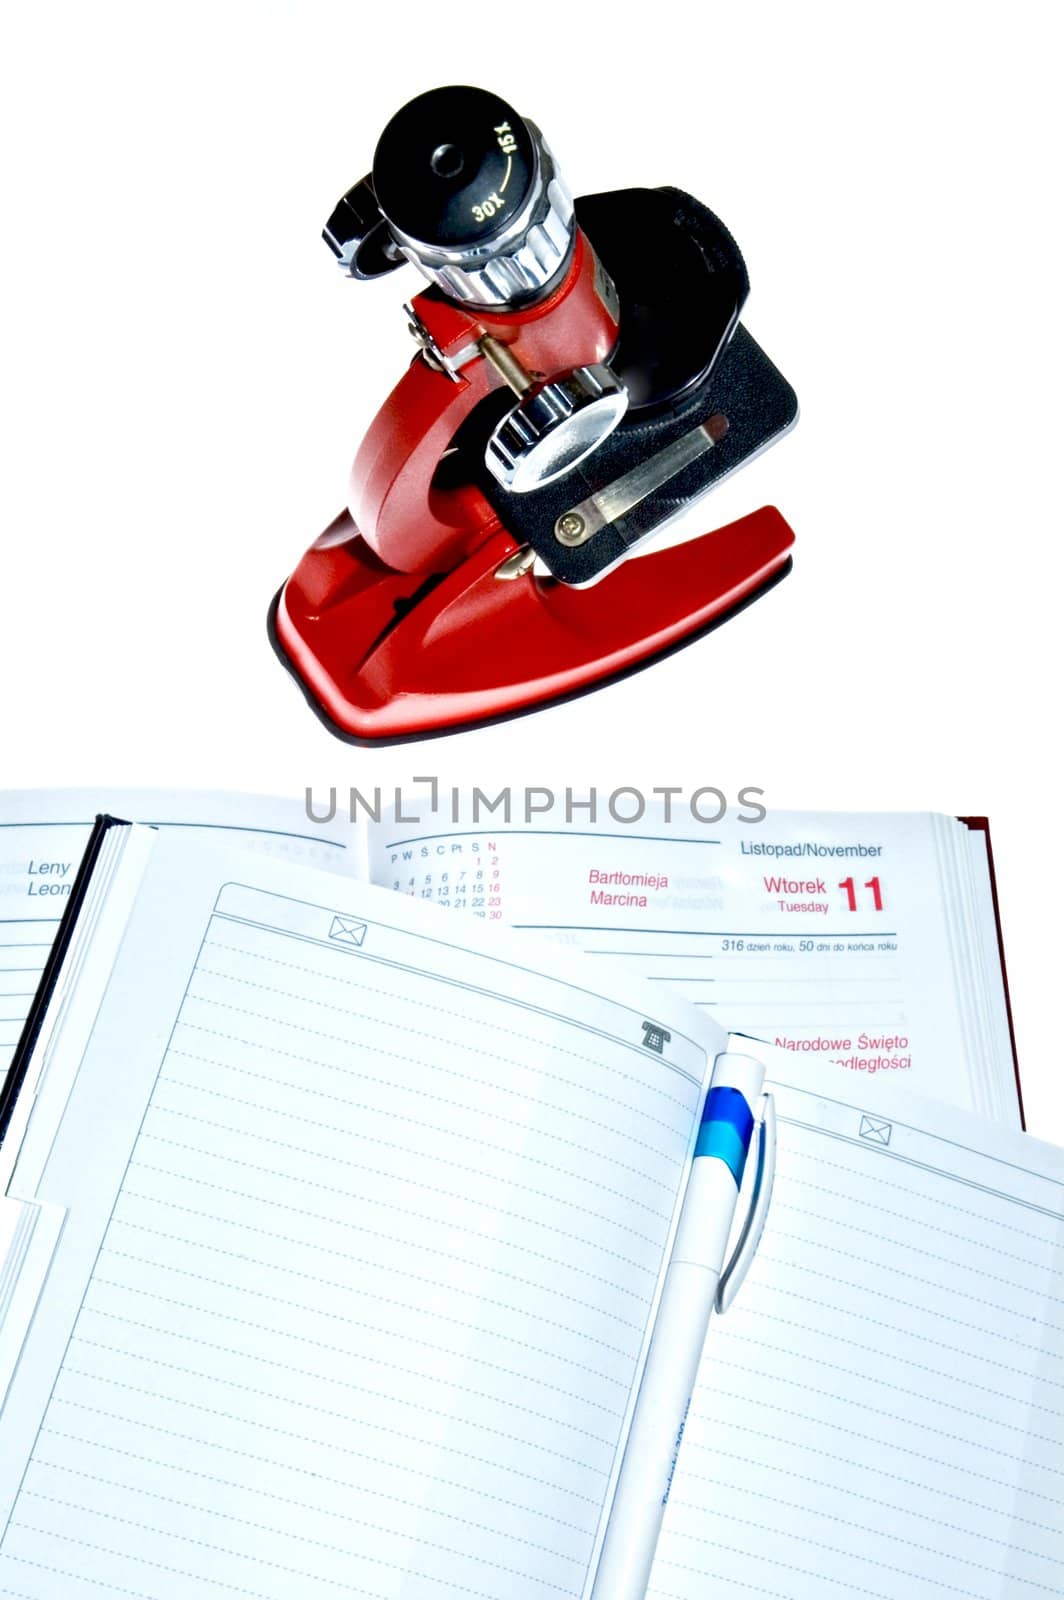 Microscope and notes by Michalowski